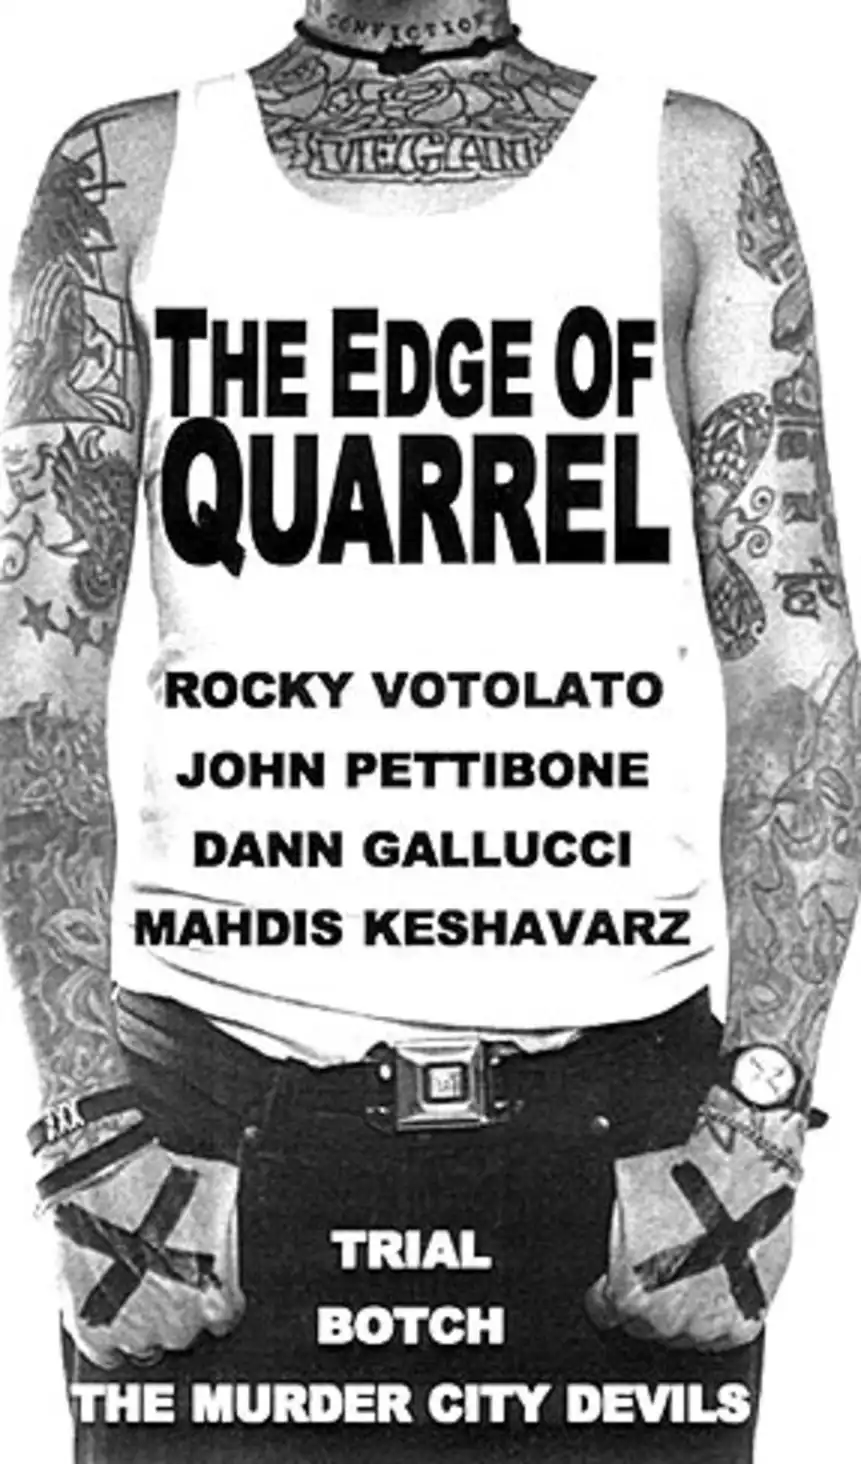 Watch and Download The Edge of Quarrel 1